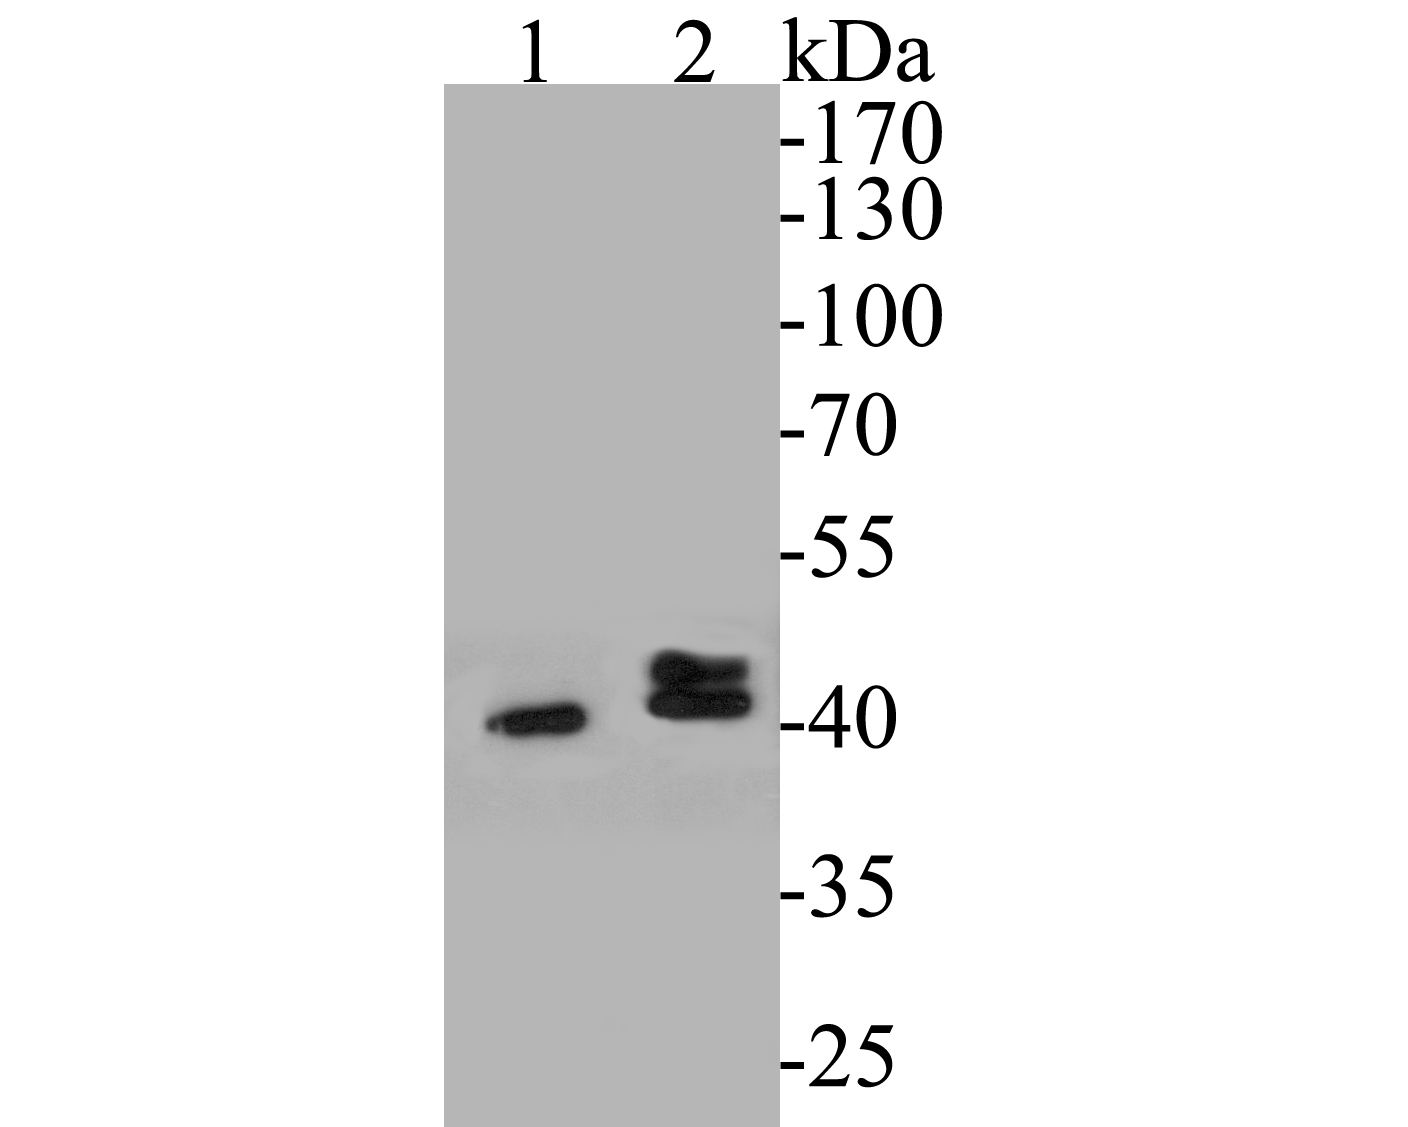 Western blot analysis of P2X6 on different lysates. Proteins were transferred to a PVDF membrane and blocked with 5% BSA in PBS for 1 hour at room temperature. The primary antibody (ER1901-49, 1/500) was used in 5% BSA at room temperature for 2 hours. Goat Anti-Rabbit IgG - HRP Secondary Antibody (HA1001) at 1:5,000 dilution was used for 1 hour at room temperature.<br />
Positive control: <br />
Lane 1: Jurkat cell lysate<br />
Lane 2: K562 cell lysate